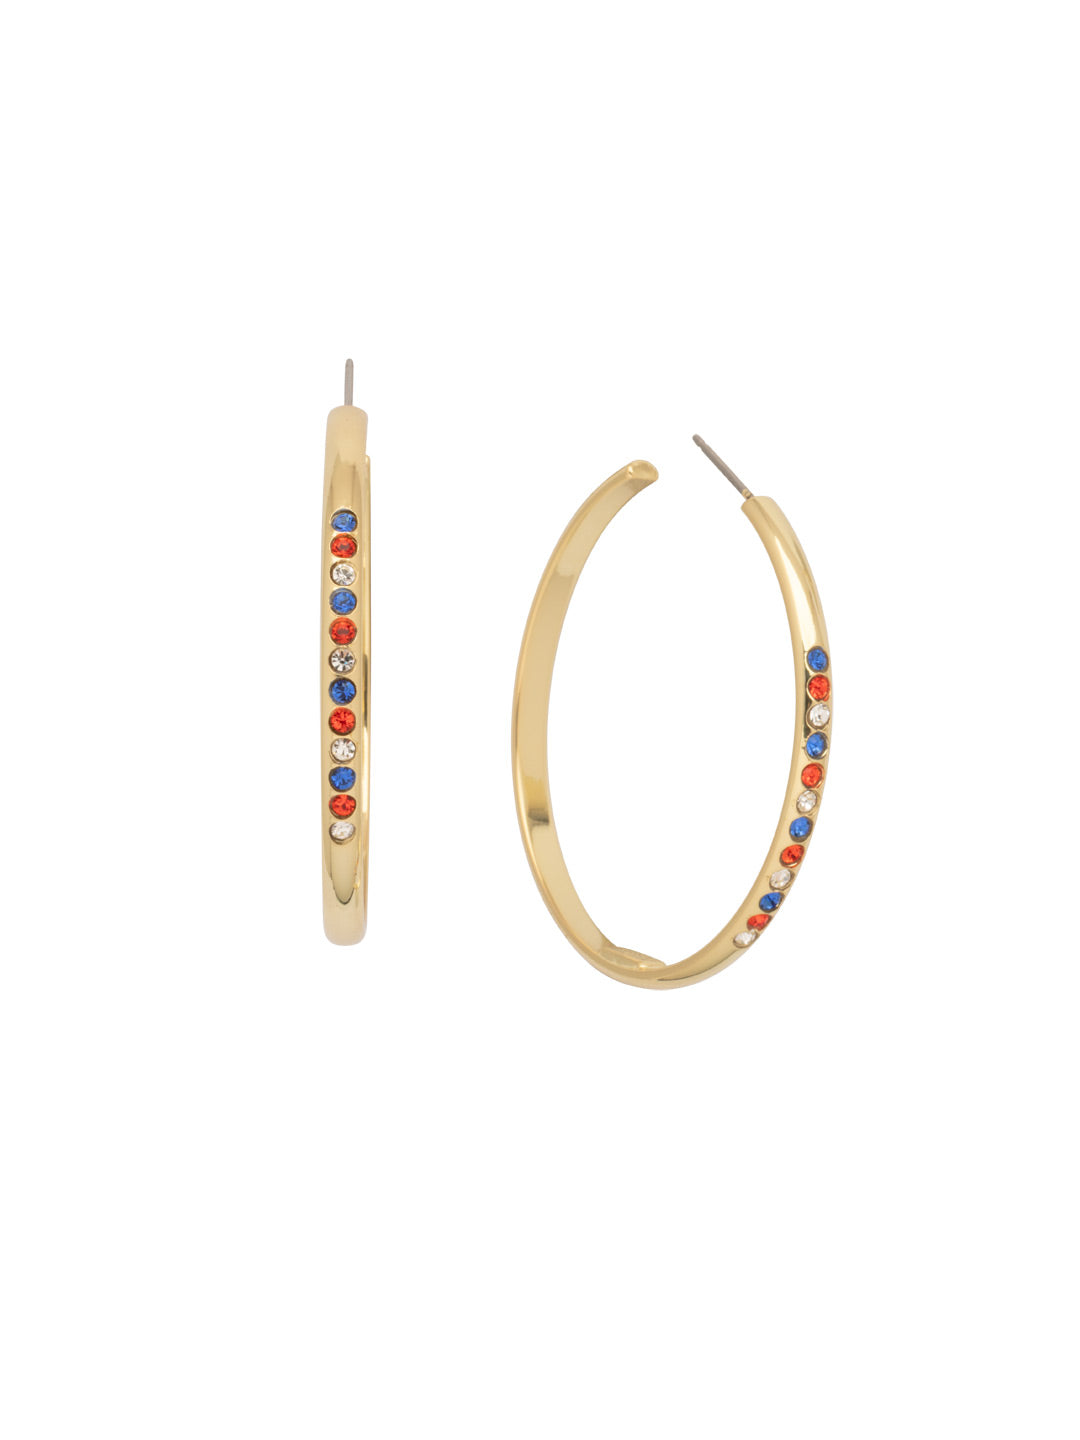 Bugsy Hoop Earrings - EEP56BGOCR - <p>Quirky and fun, that's the Bugsy Hoop Earring. Veering from the traditional metal hoop, this pair features a fun row of sparking crystals spot-on center. From Sorrelli's Orange Crush collection in our Bright Gold-tone finish.</p>